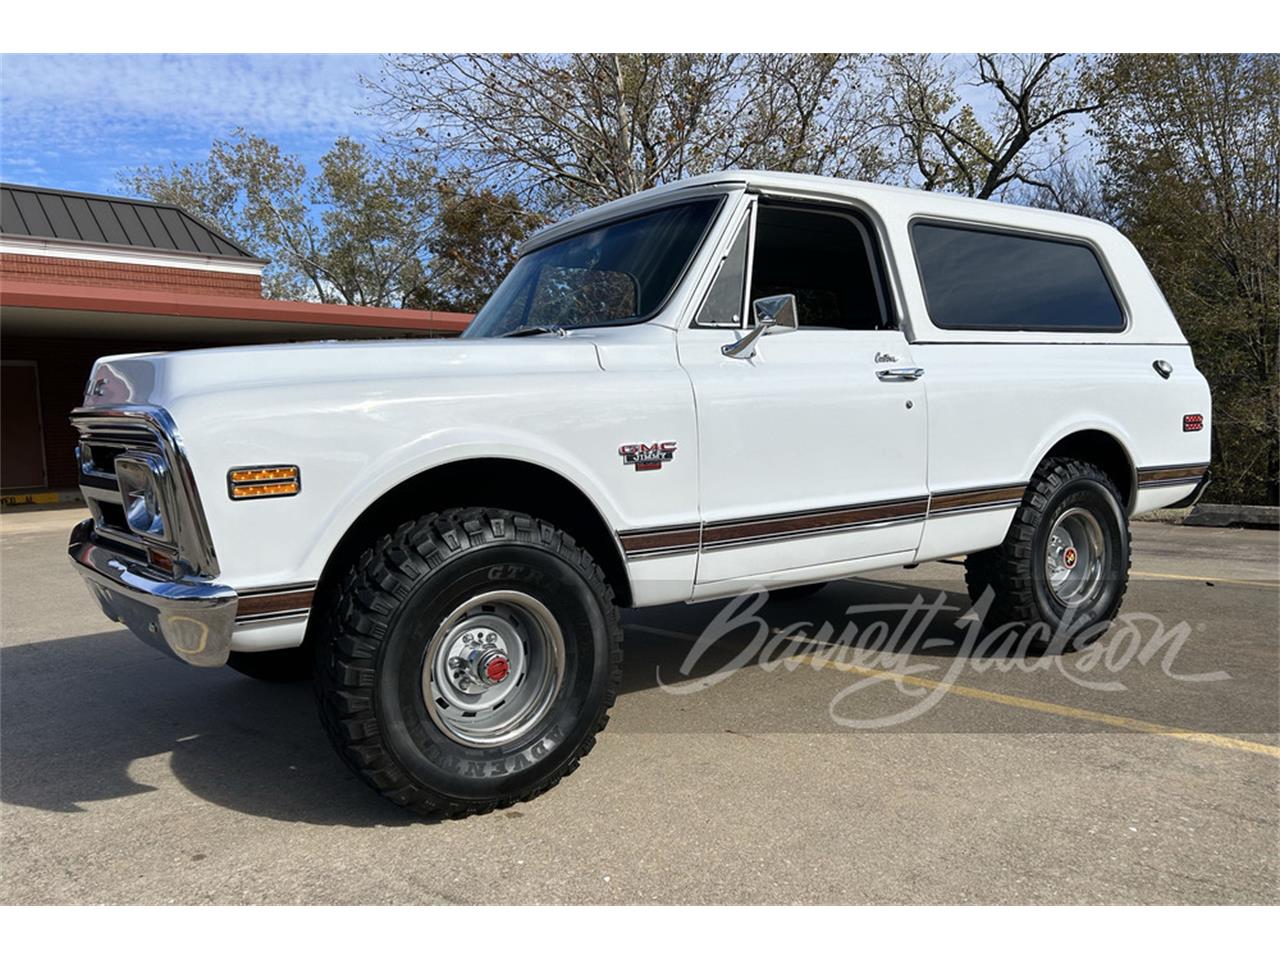 For Sale at Auction: 1972 GMC Jimmy in Scottsdale, Arizona for sale in Scottsdale, AZ